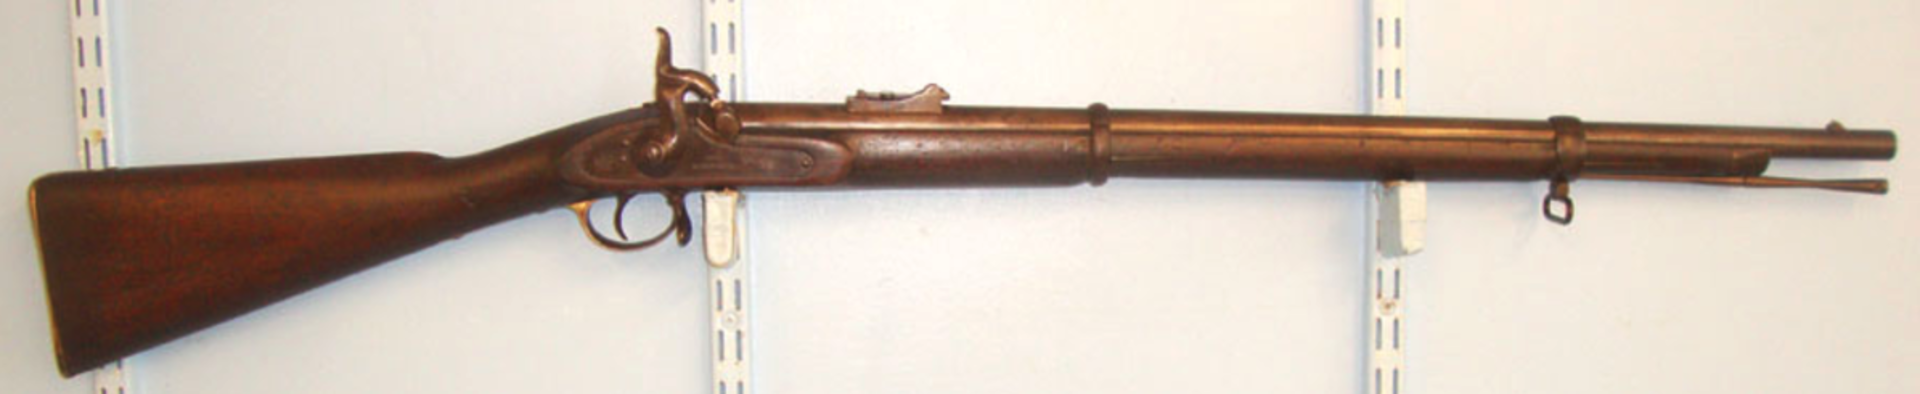 VERY RARE, One Of 16,000 British Crimean War Era 1856 Enfield .577” Cal, Percussion Rifled Musket